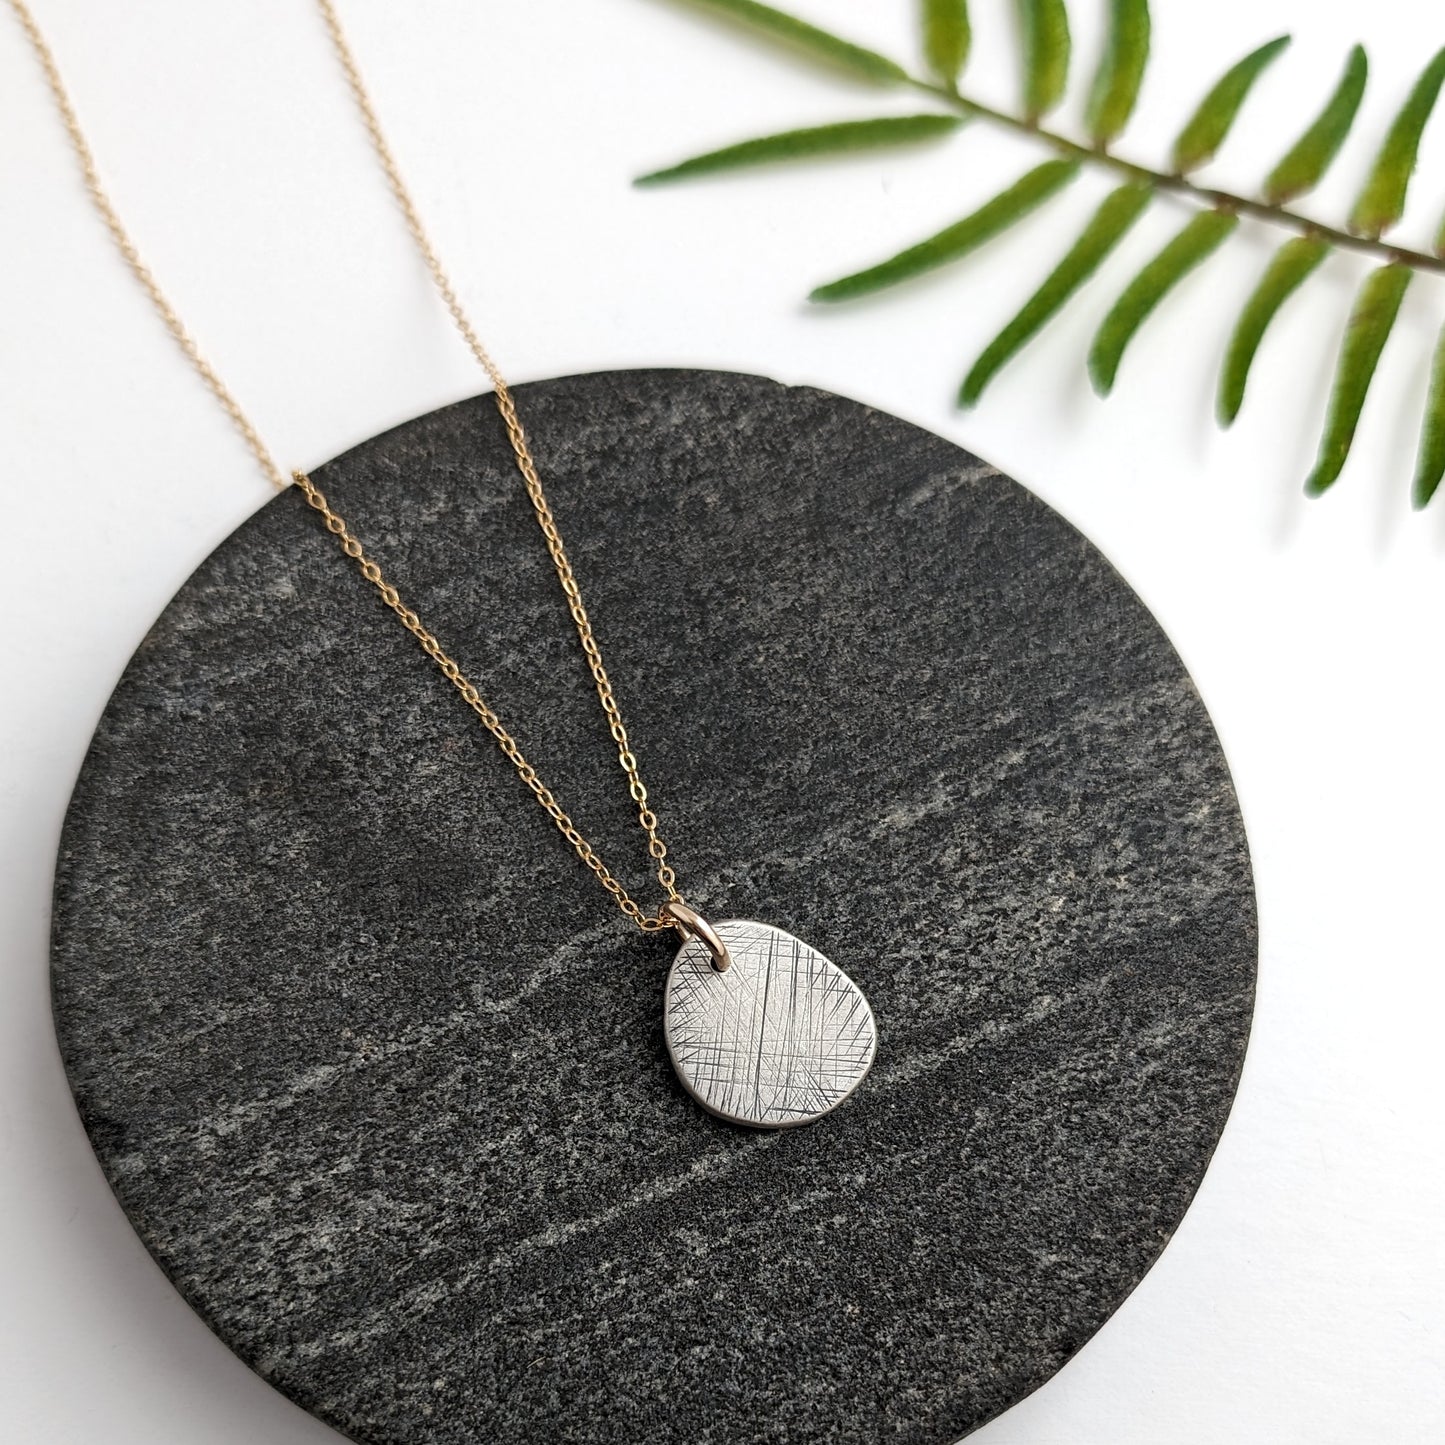 Textured Flat Pebble Mixed Metal Charm Necklace